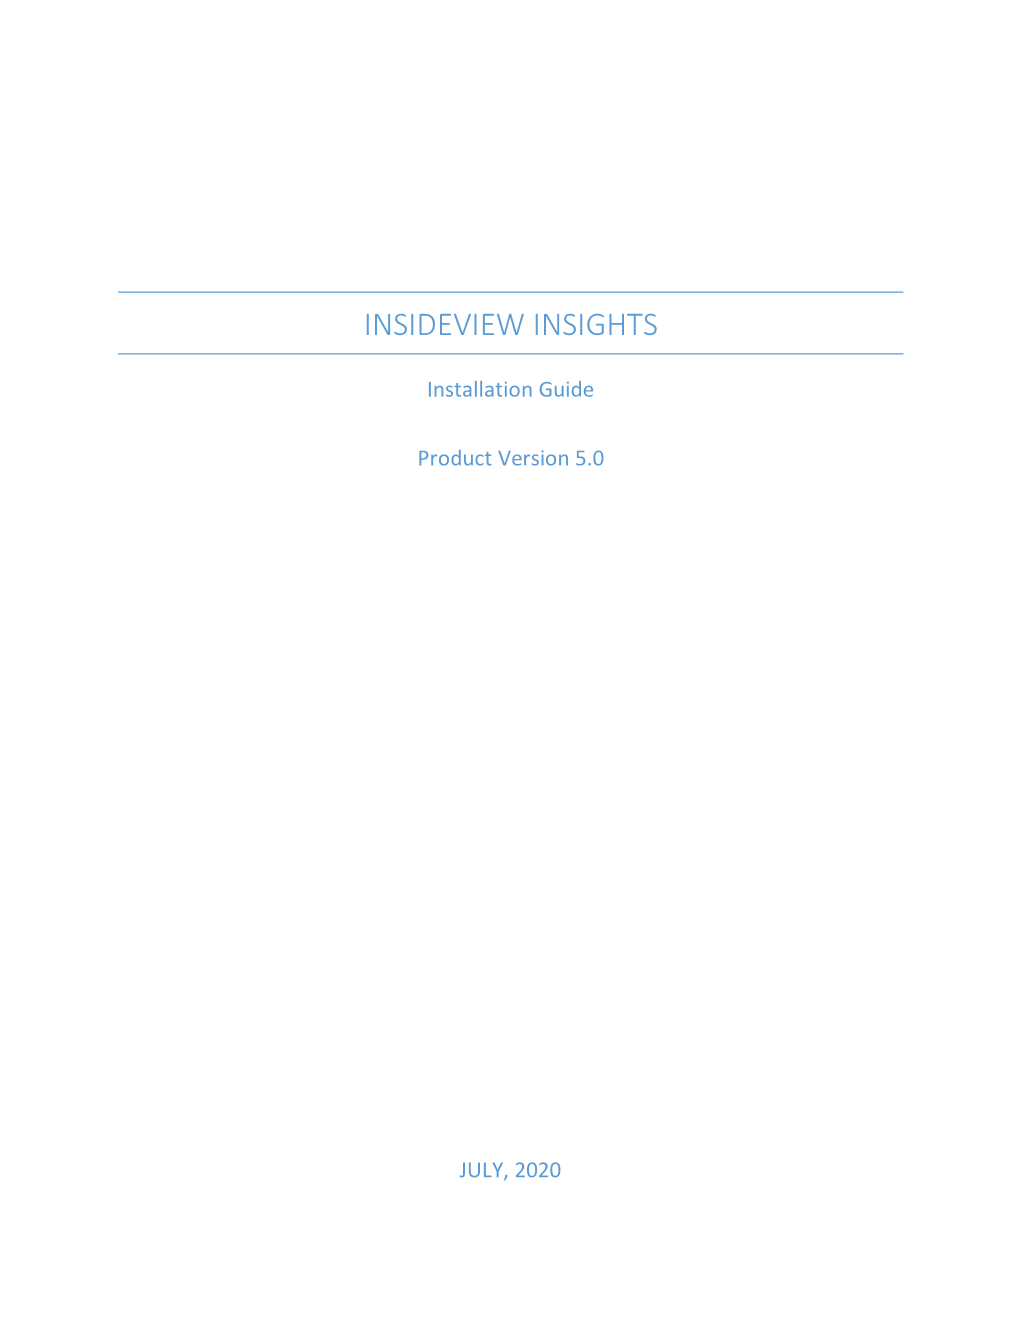 Insideview Insights